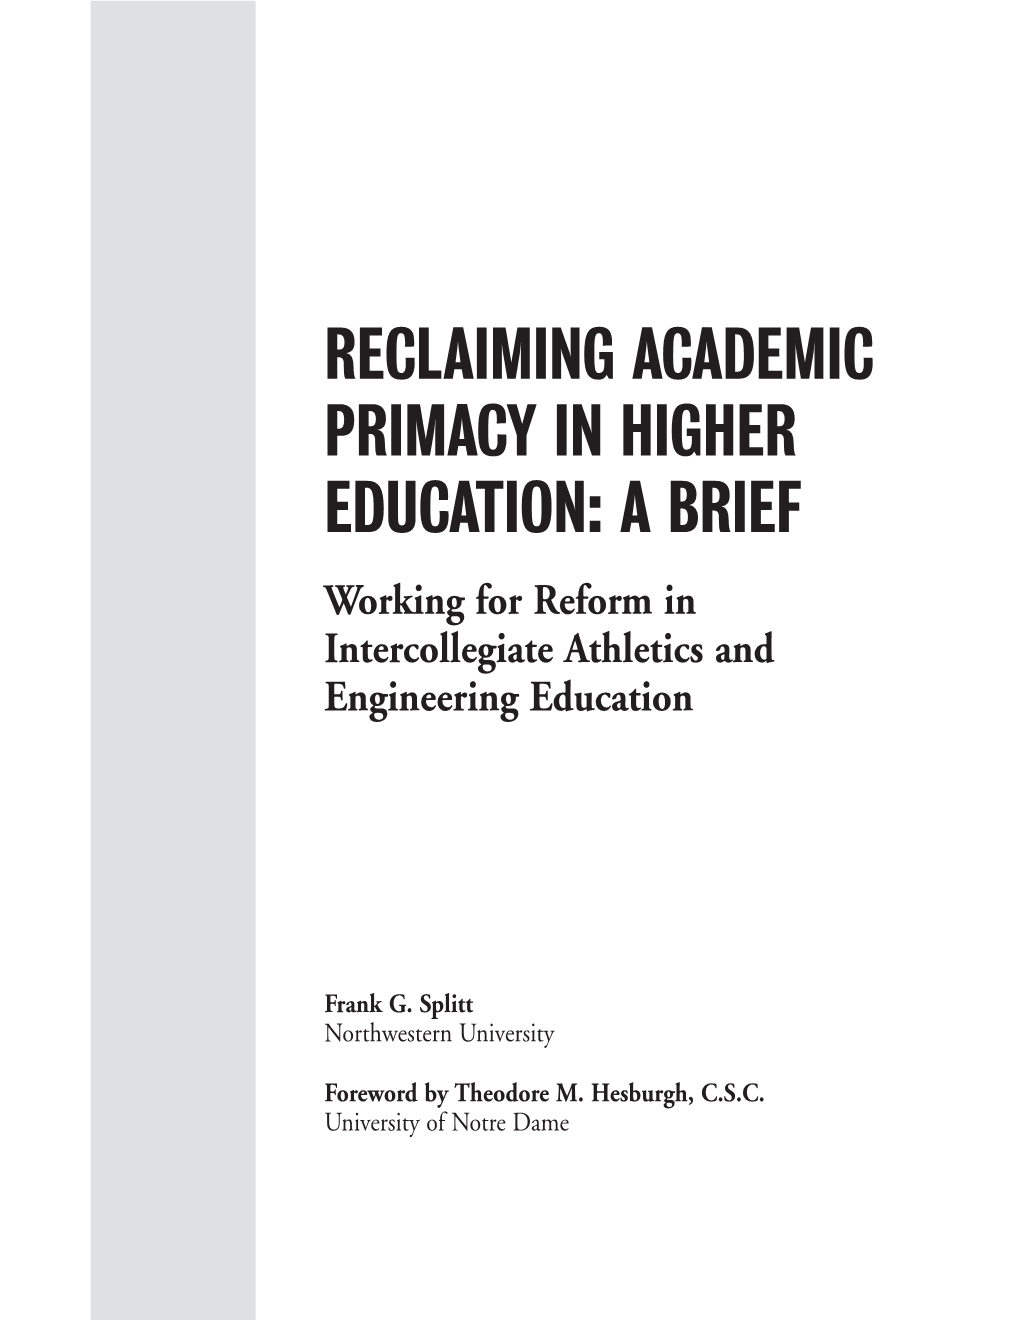 RECLAIMING ACADEMIC PRIMACY in HIGHER EDUCATION: a BRIEF Working for Reform in Intercollegiate Athletics and Engineering Education